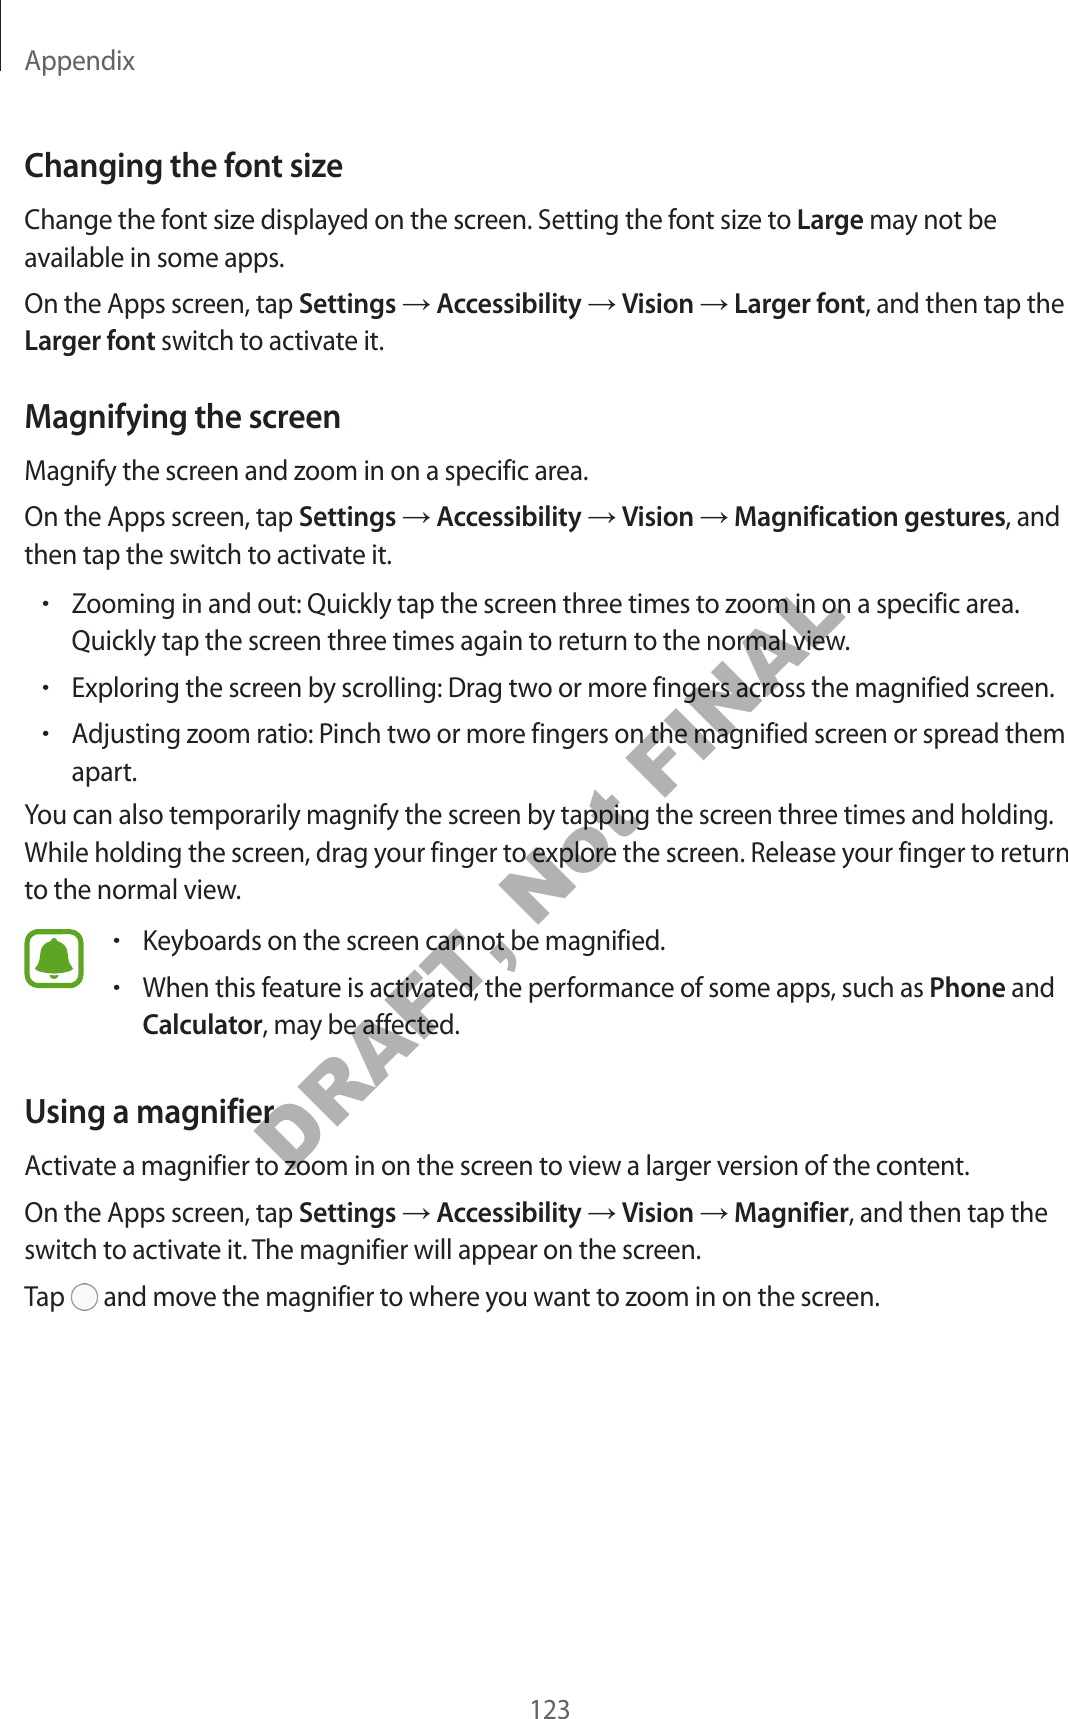 Appendix123Changing the font sizeChange the font size displayed on the screen. Setting the font size to Large may not be available in some apps.On the Apps screen, tap Settings  Accessibility  Vision  Larger font, and then tap the Larger font switch to activate it.Magnifying the screenMagnify the screen and zoom in on a specific area.On the Apps screen, tap Settings  Accessibility  Vision  Magnification gestures, and then tap the switch to activate it.•Zooming in and out: Quickly tap the screen three times to zoom in on a specific area. Quickly tap the screen three times again to return to the normal view.•Exploring the screen by scrolling: Drag two or more fingers across the magnified screen.•Adjusting zoom ratio: Pinch two or more fingers on the magnified screen or spread them apart.You can also temporarily magnify the screen by tapping the screen three times and holding. While holding the screen, drag your finger to explore the screen. Release your finger to return to the normal view.•Keyboards on the screen cannot be magnified.•When this feature is activated, the performance of some apps, such as Phone and Calculator, may be affected.Using a magnifierActivate a magnifier to zoom in on the screen to view a larger version of the content.On the Apps screen, tap Settings  Accessibility  Vision  Magnifier, and then tap the switch to activate it. The magnifier will appear on the screen.Tap   and move the magnifier to where you want to zoom in on the screen.DRAFT, Not FINAL